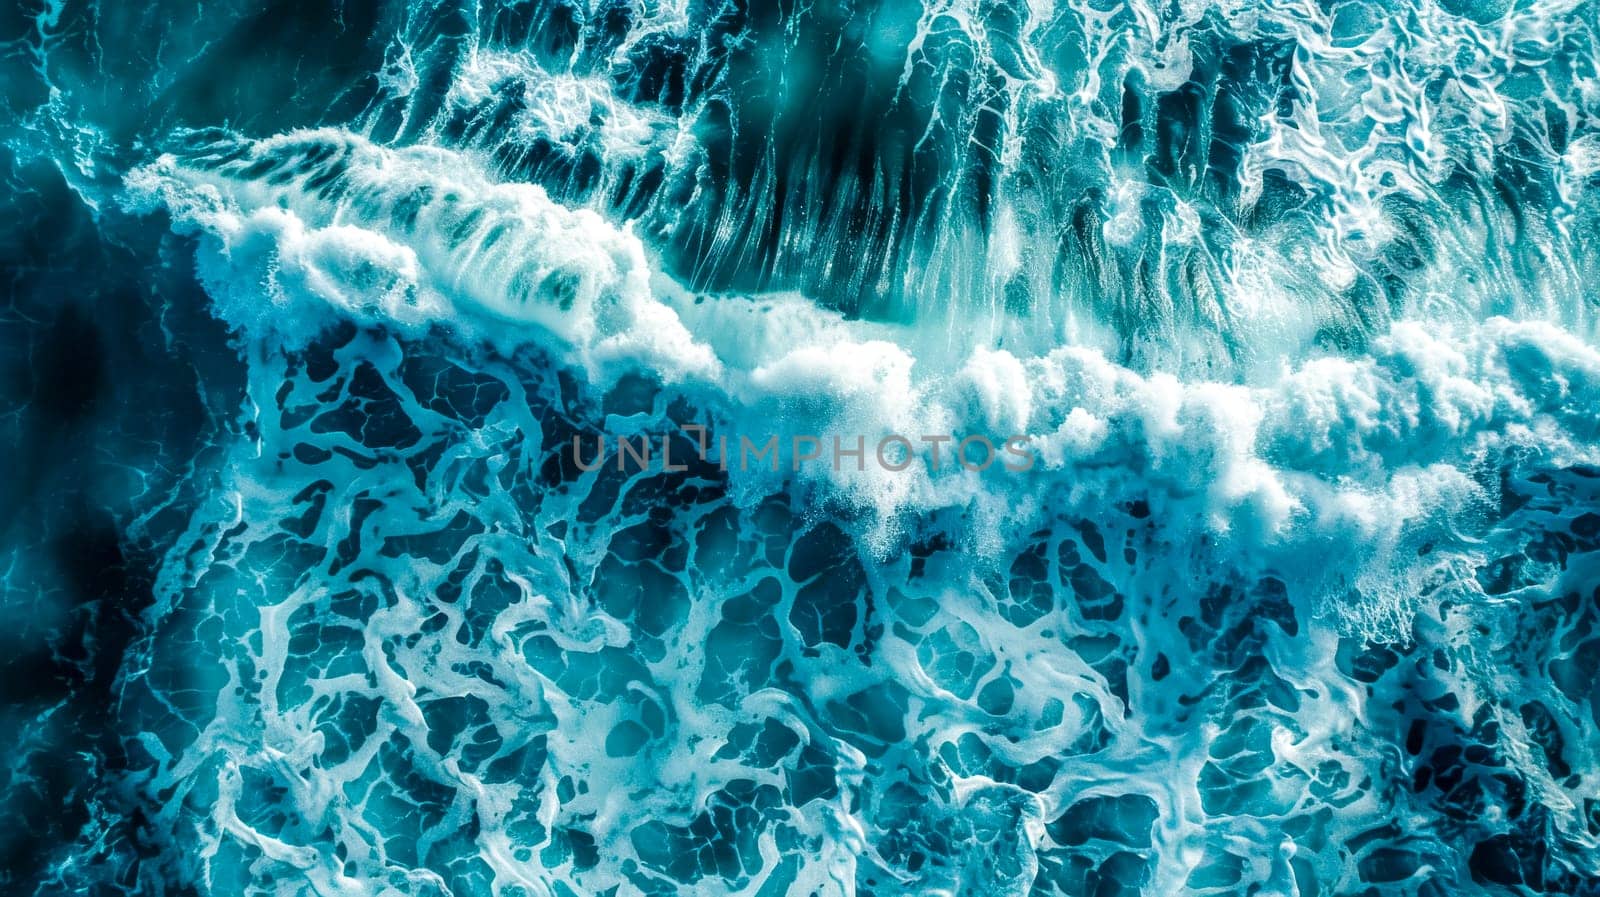 Crystalline ocean waves from above by Edophoto